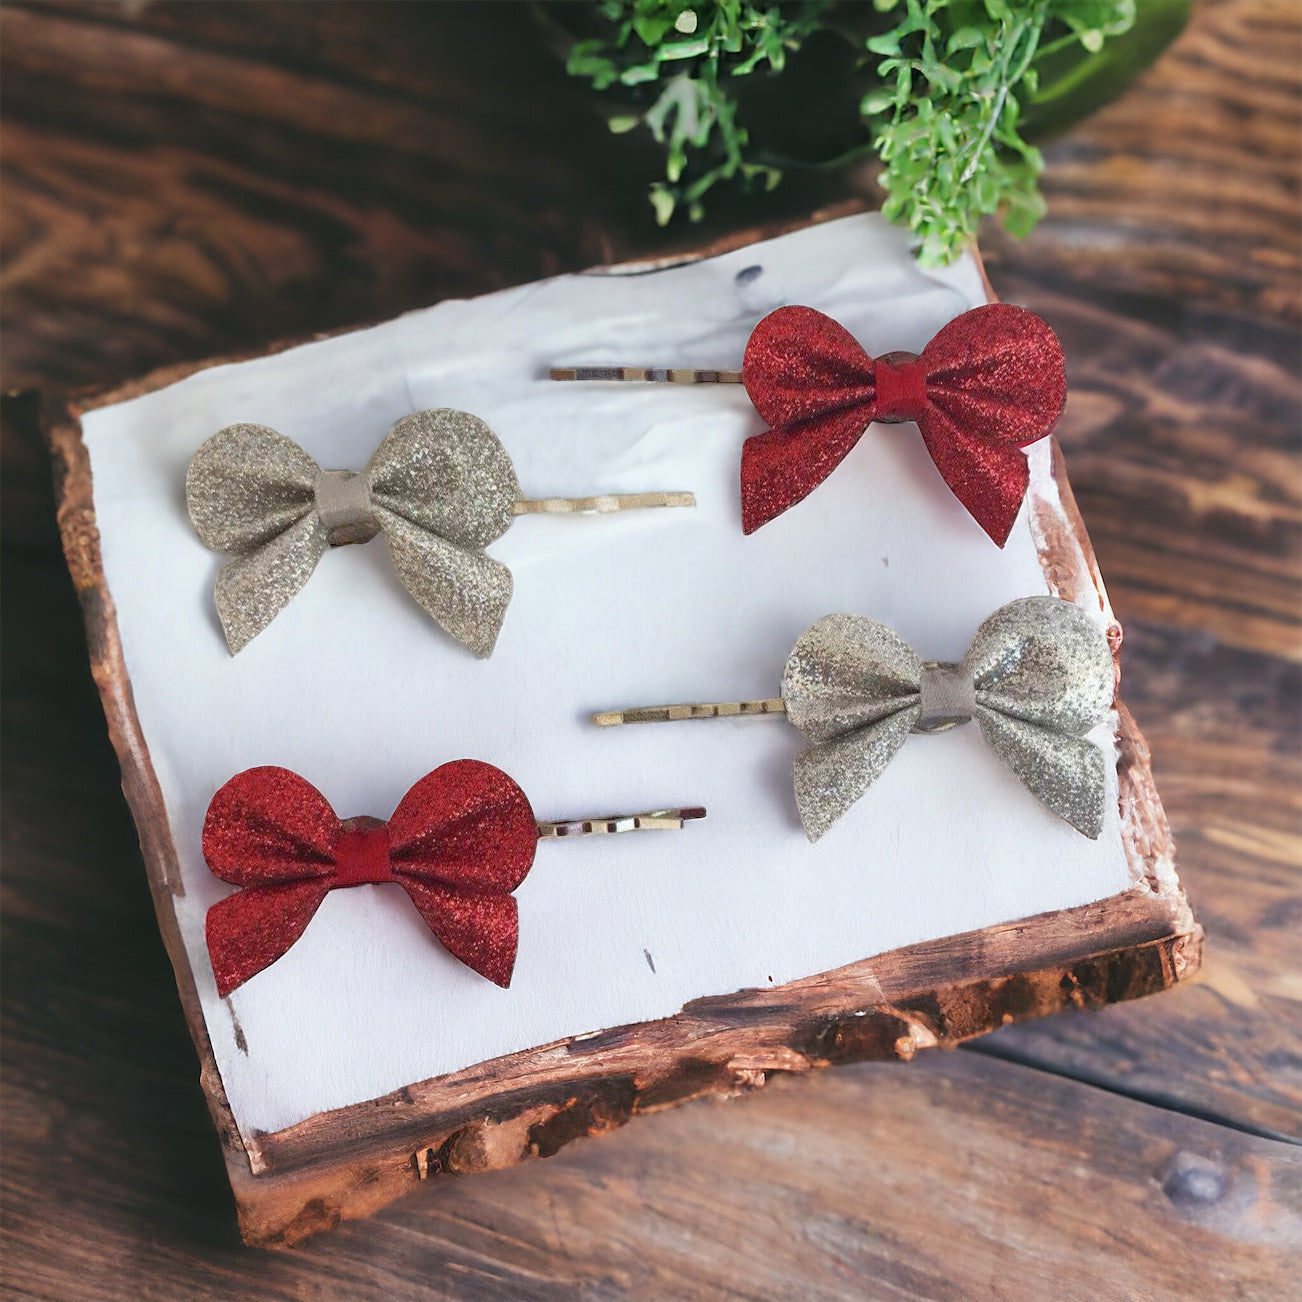 Red & Silver Glitter Bow Hair Pins - Set of 4 Sparkling Accessories